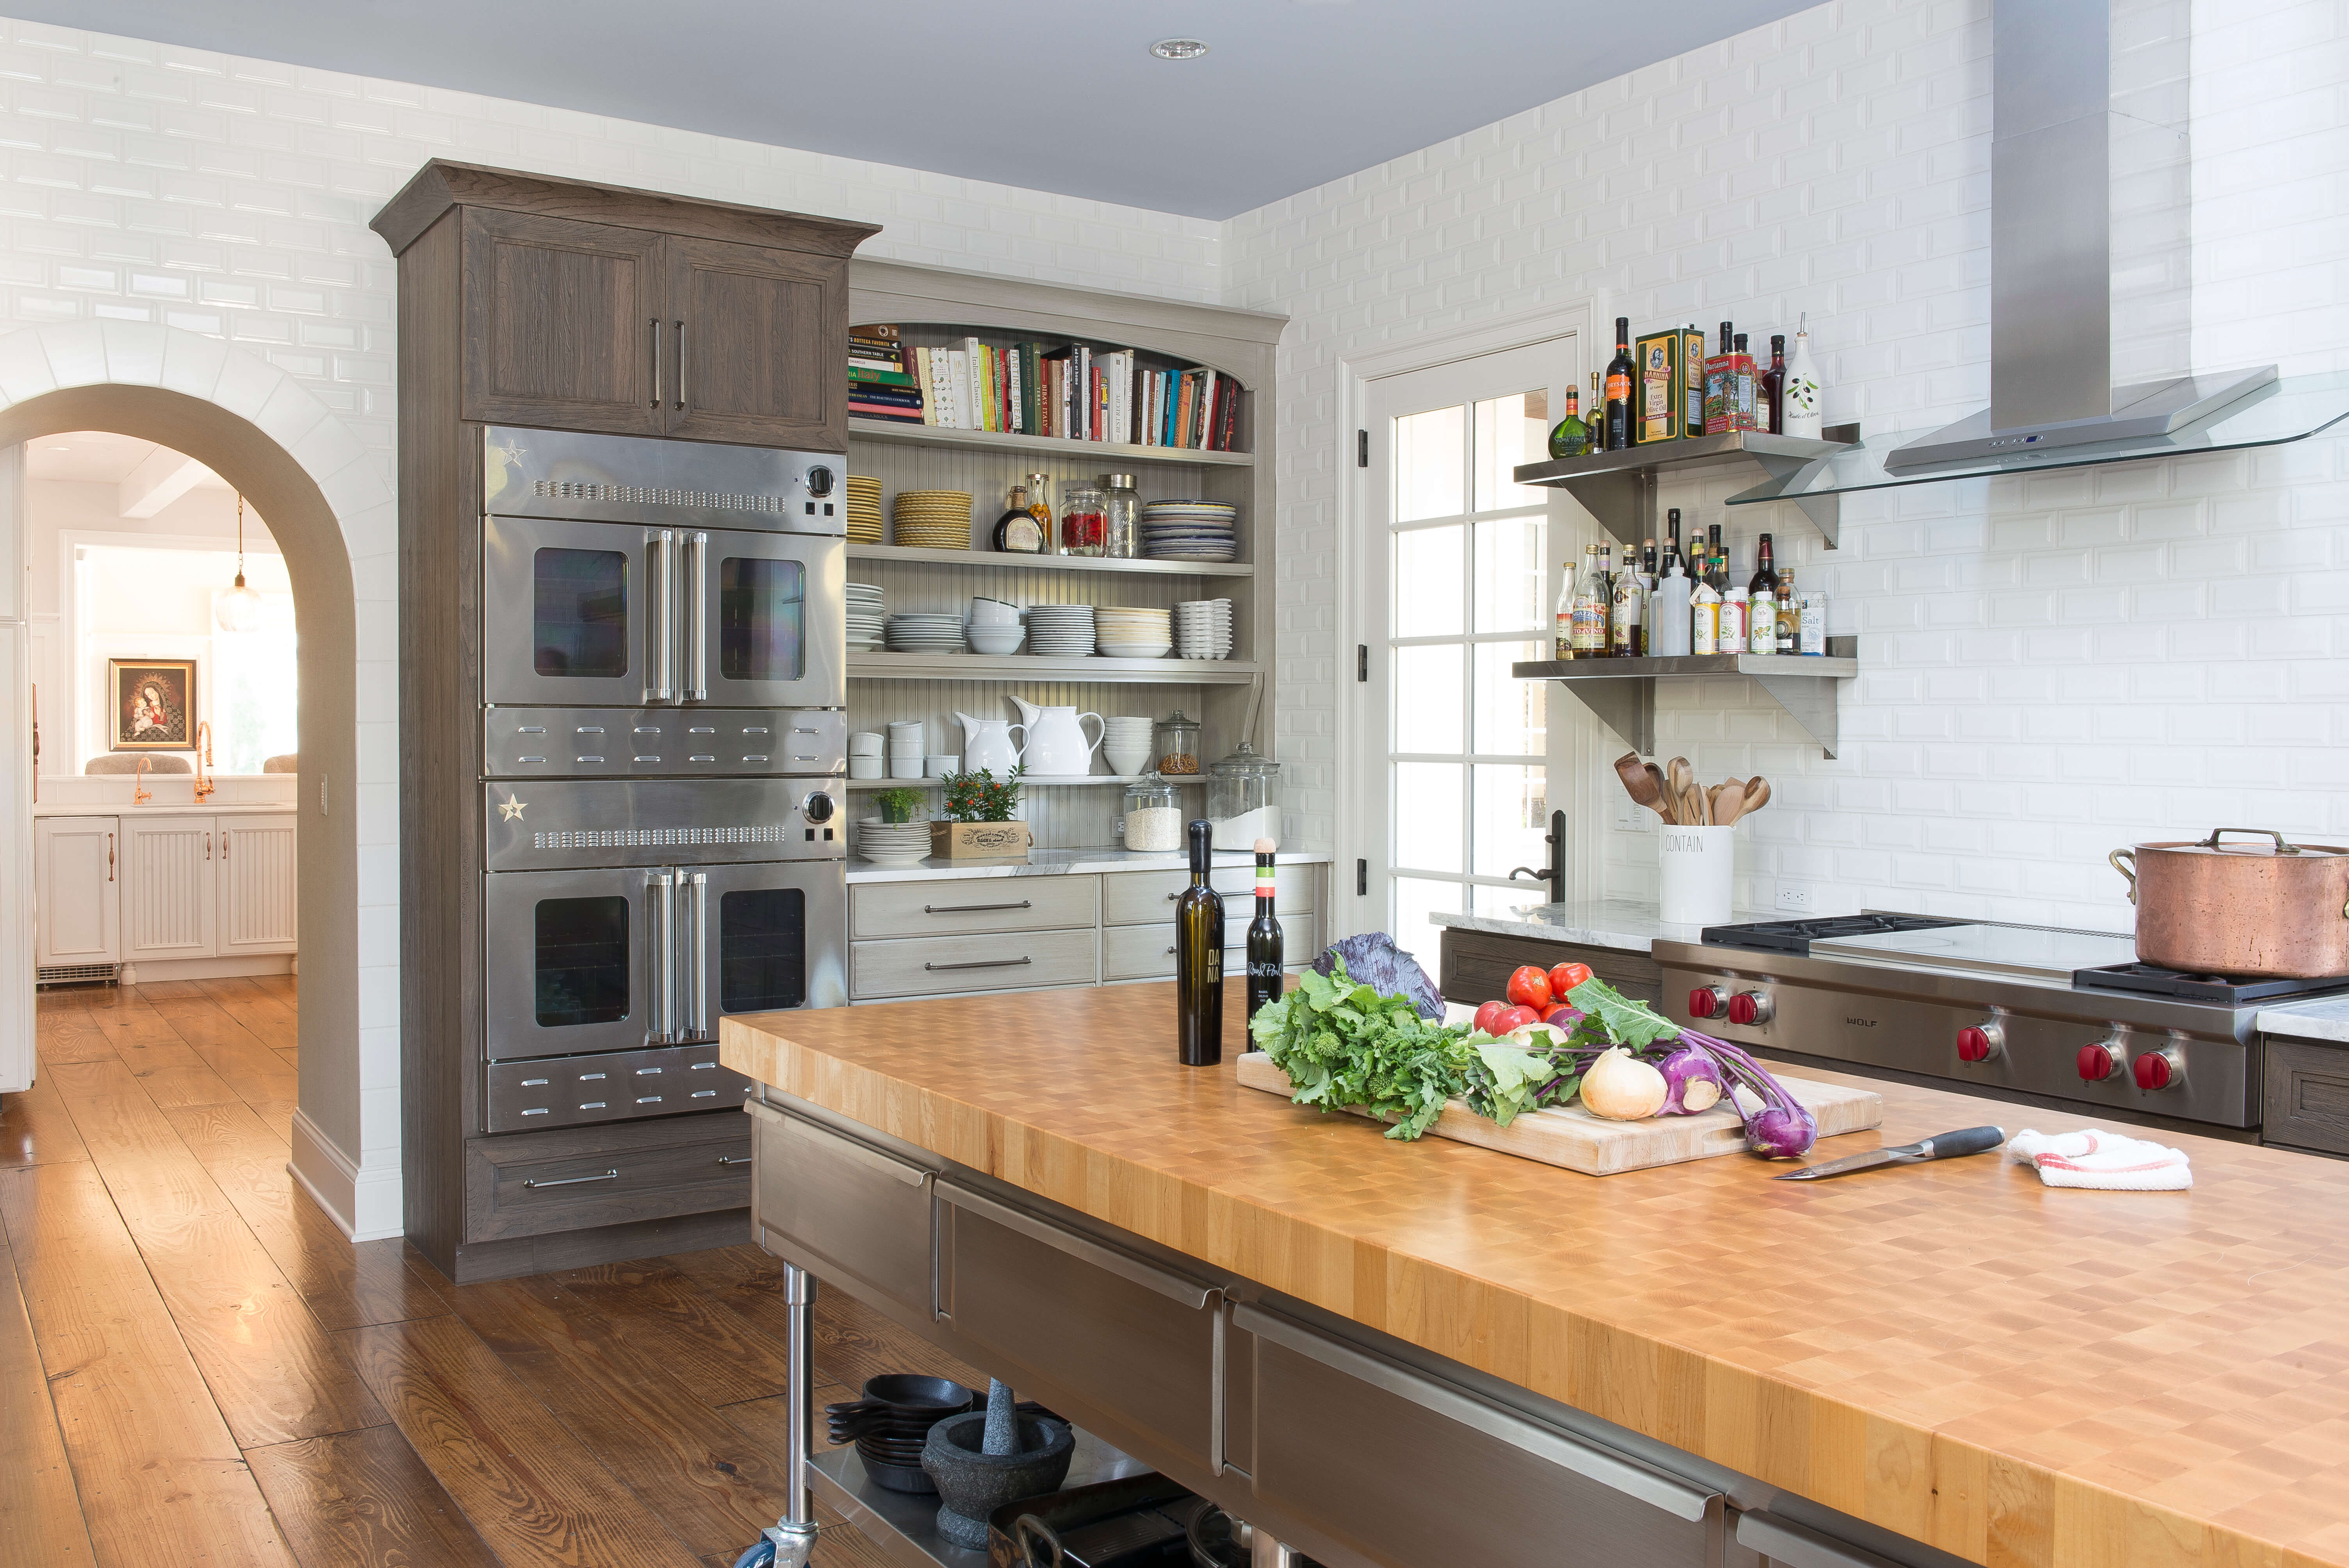 A long island with a butcher block countertop provides a large work service for food prep.